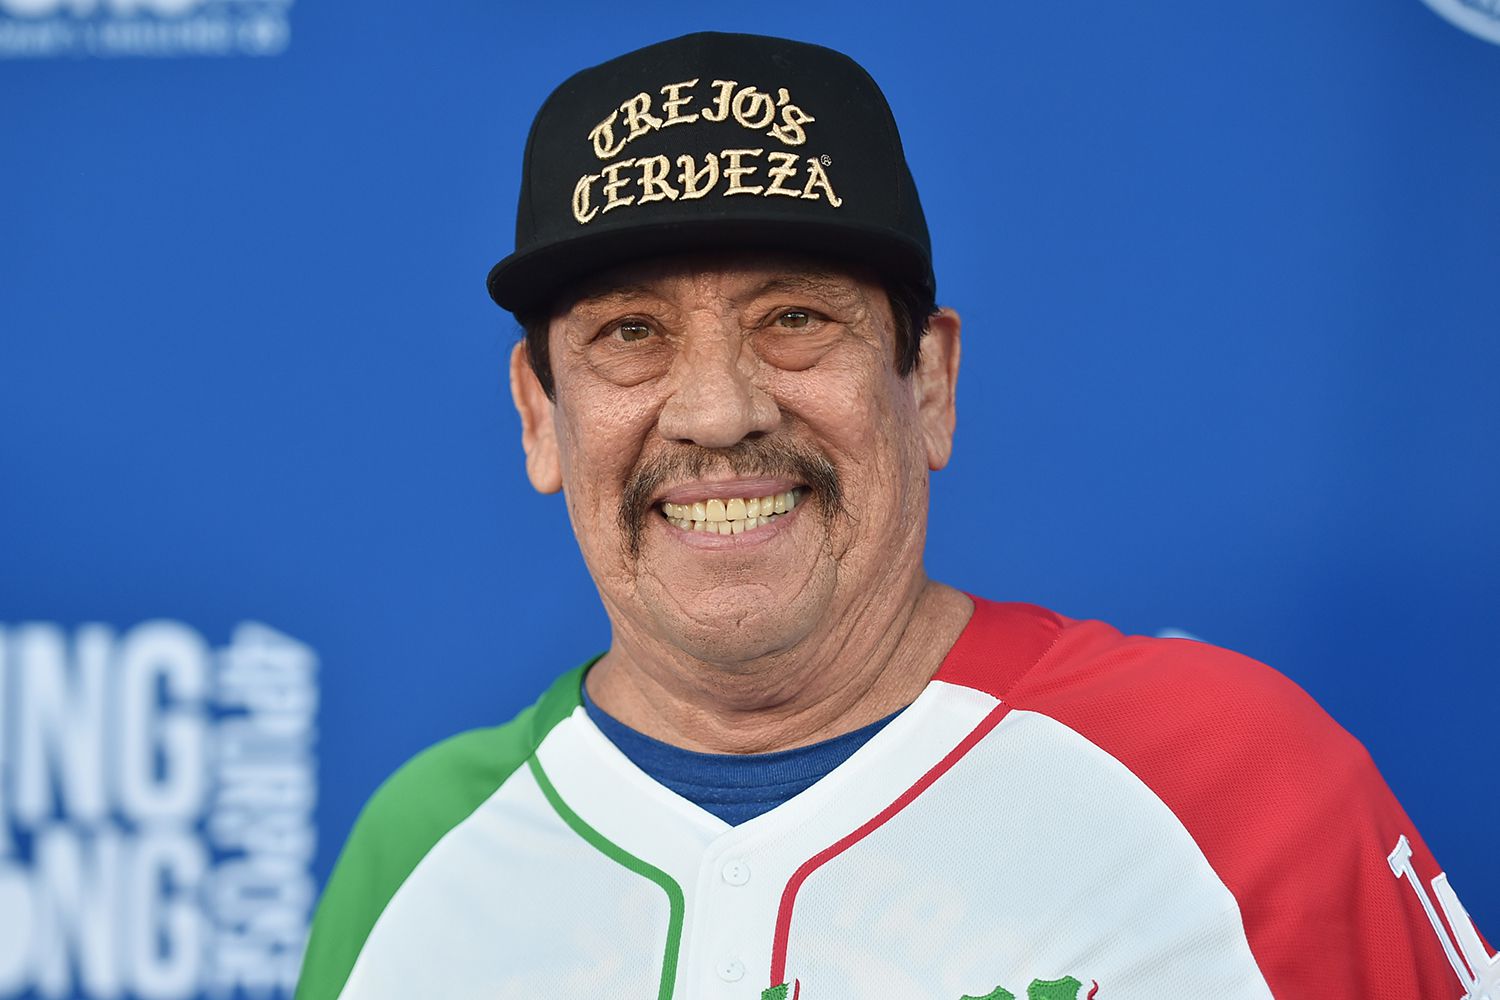 Danny Trejo attends the 10th Annual Ping Pong 4 Purpose Celebrity Tournament at Dodger Stadium